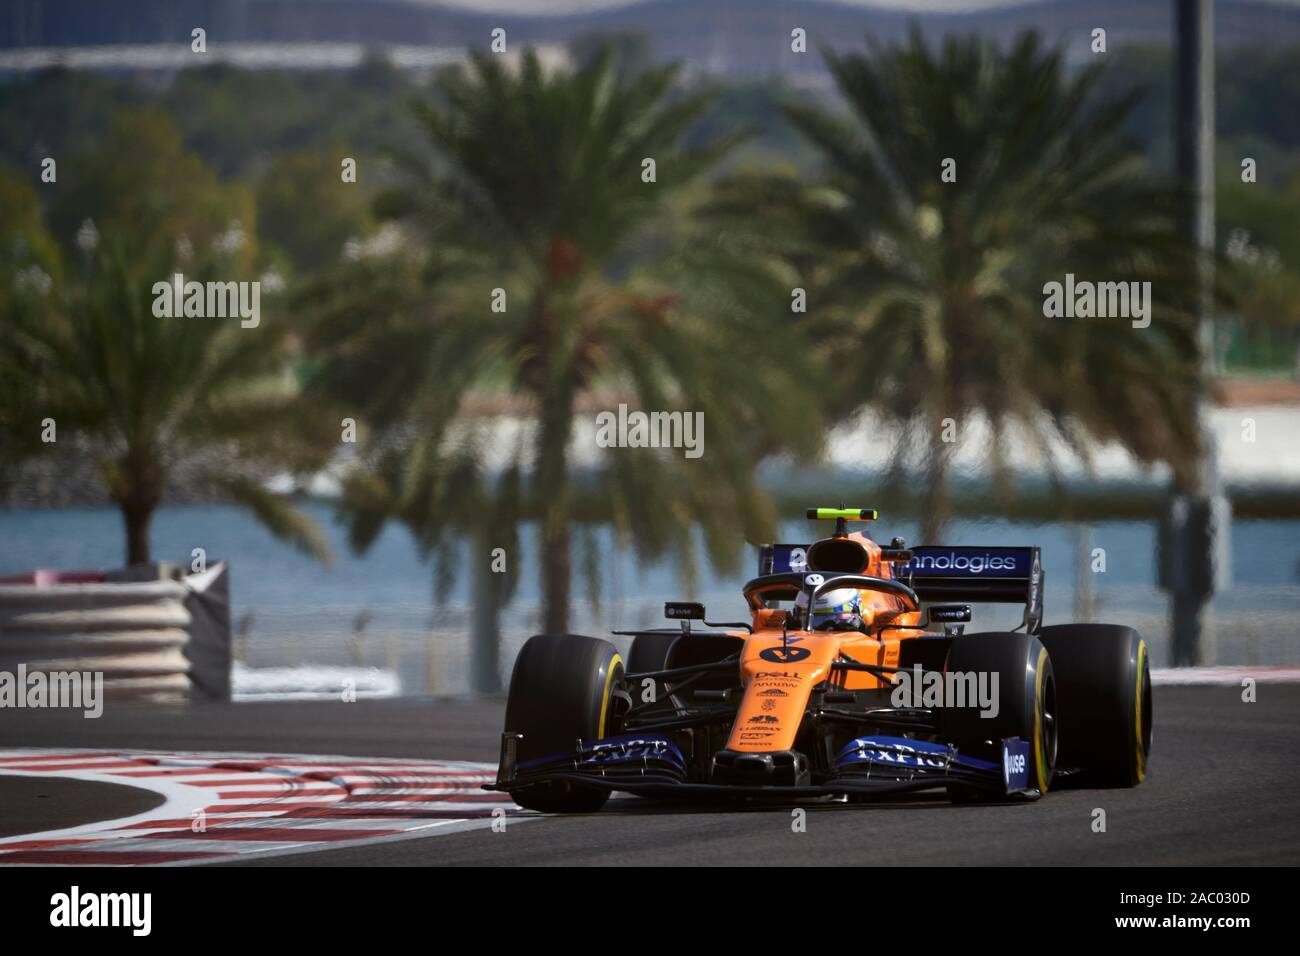 Peep Underholdning flugt ABU DHABI, UAE - NOVEMBER 29, 2019:McLaren F1 Team's British driver Lando  Norris competes during the first practice session of the Abu Dhabi F1 Grand  Prix at the Yas Marina Circuit in